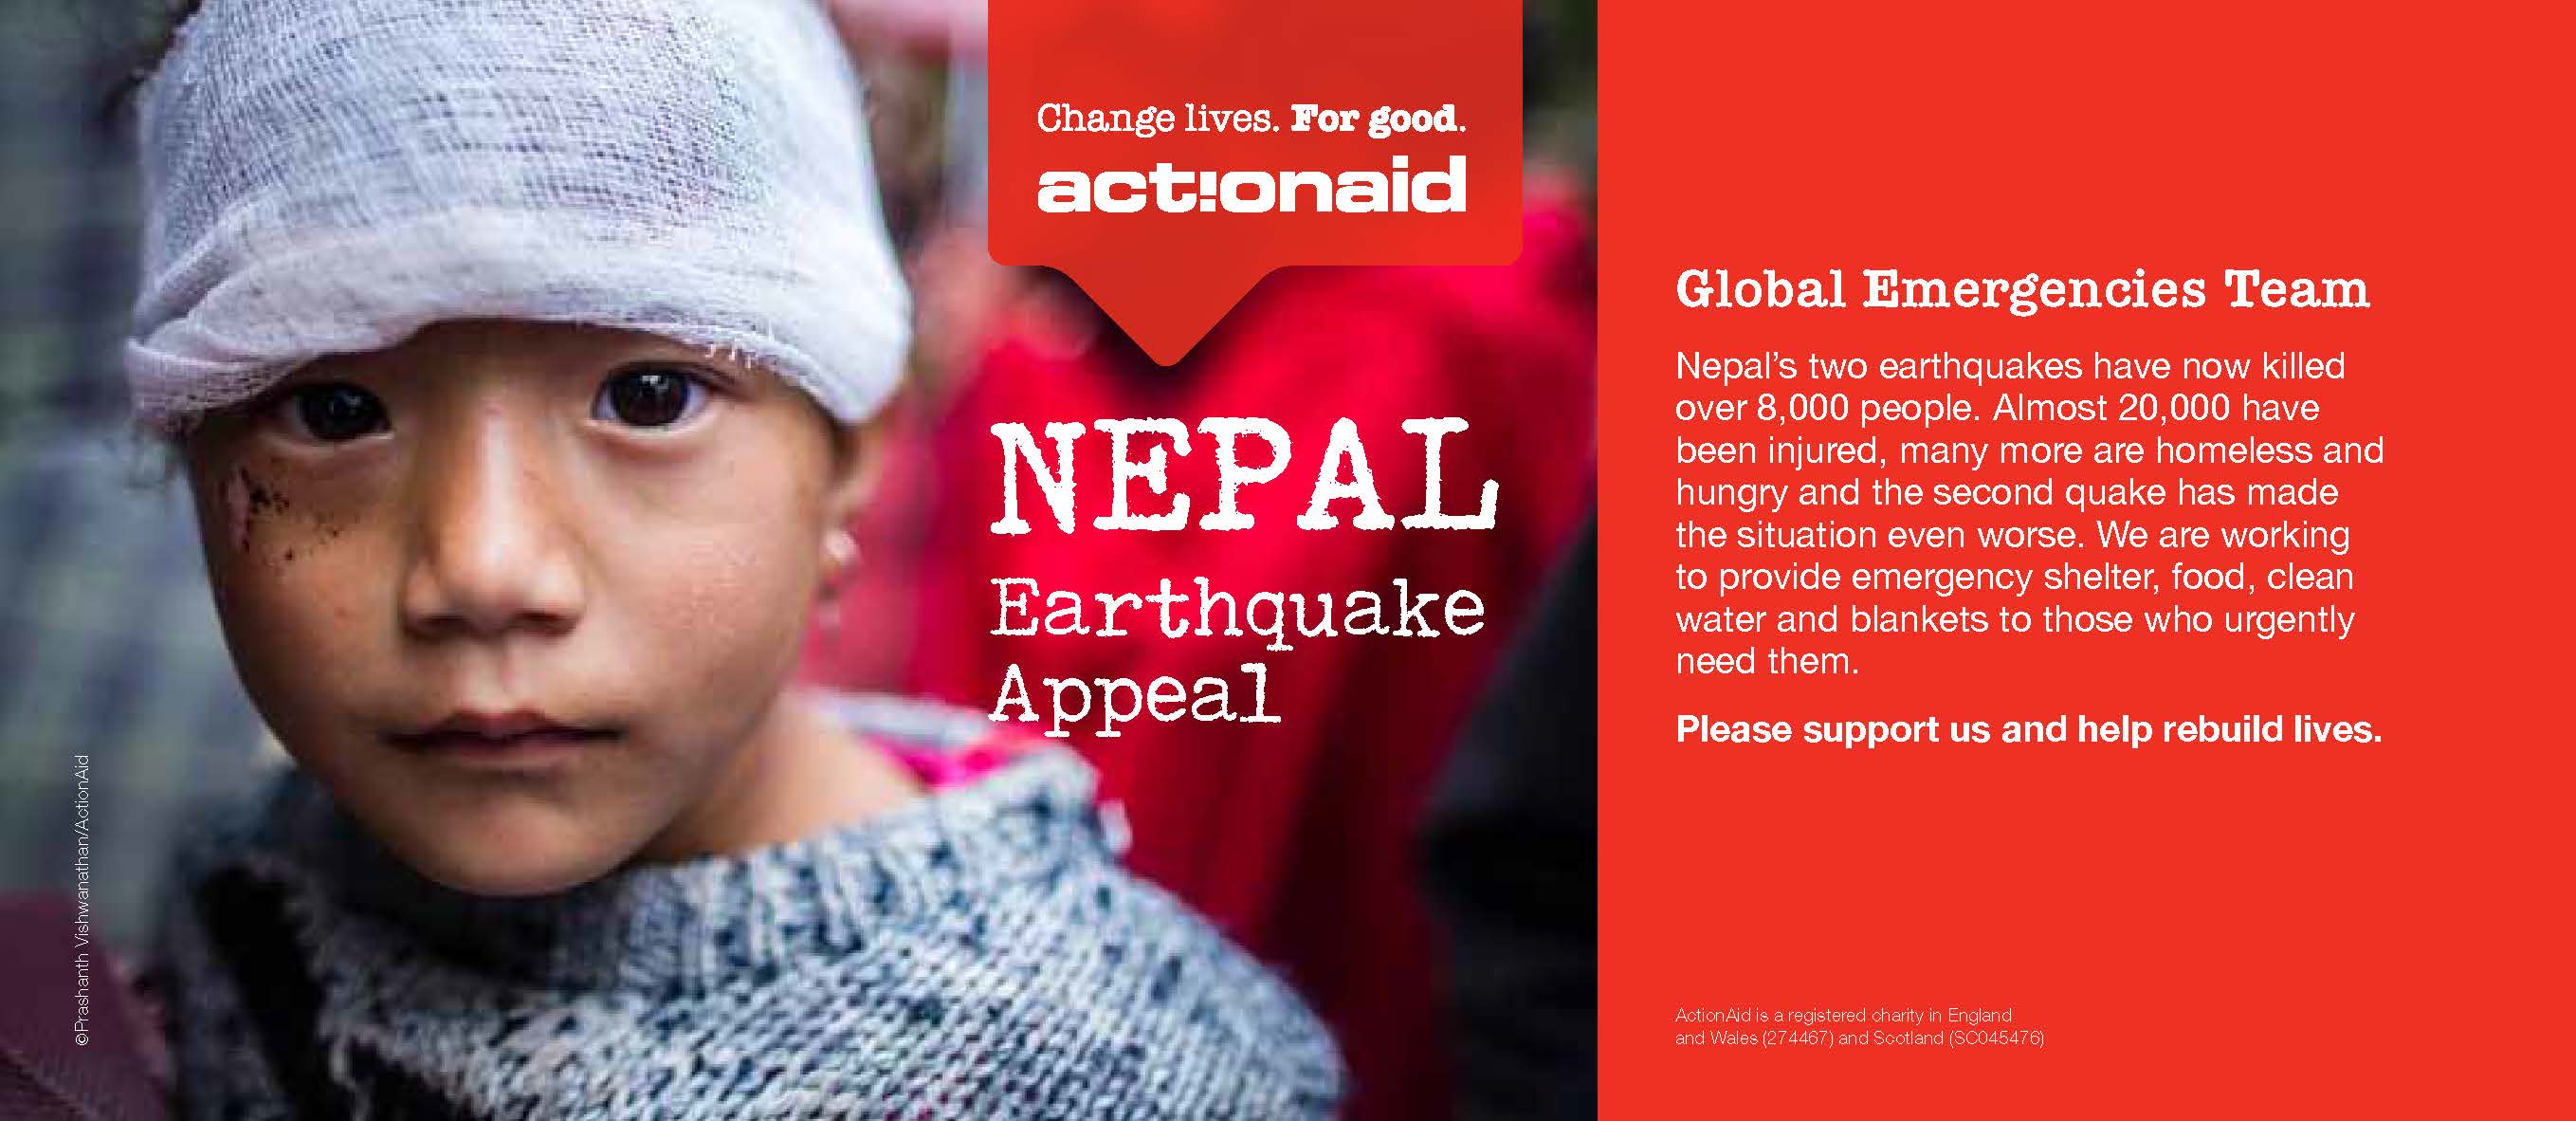 Action Aid UK - Nepal Earthquake Fundraising Appeal